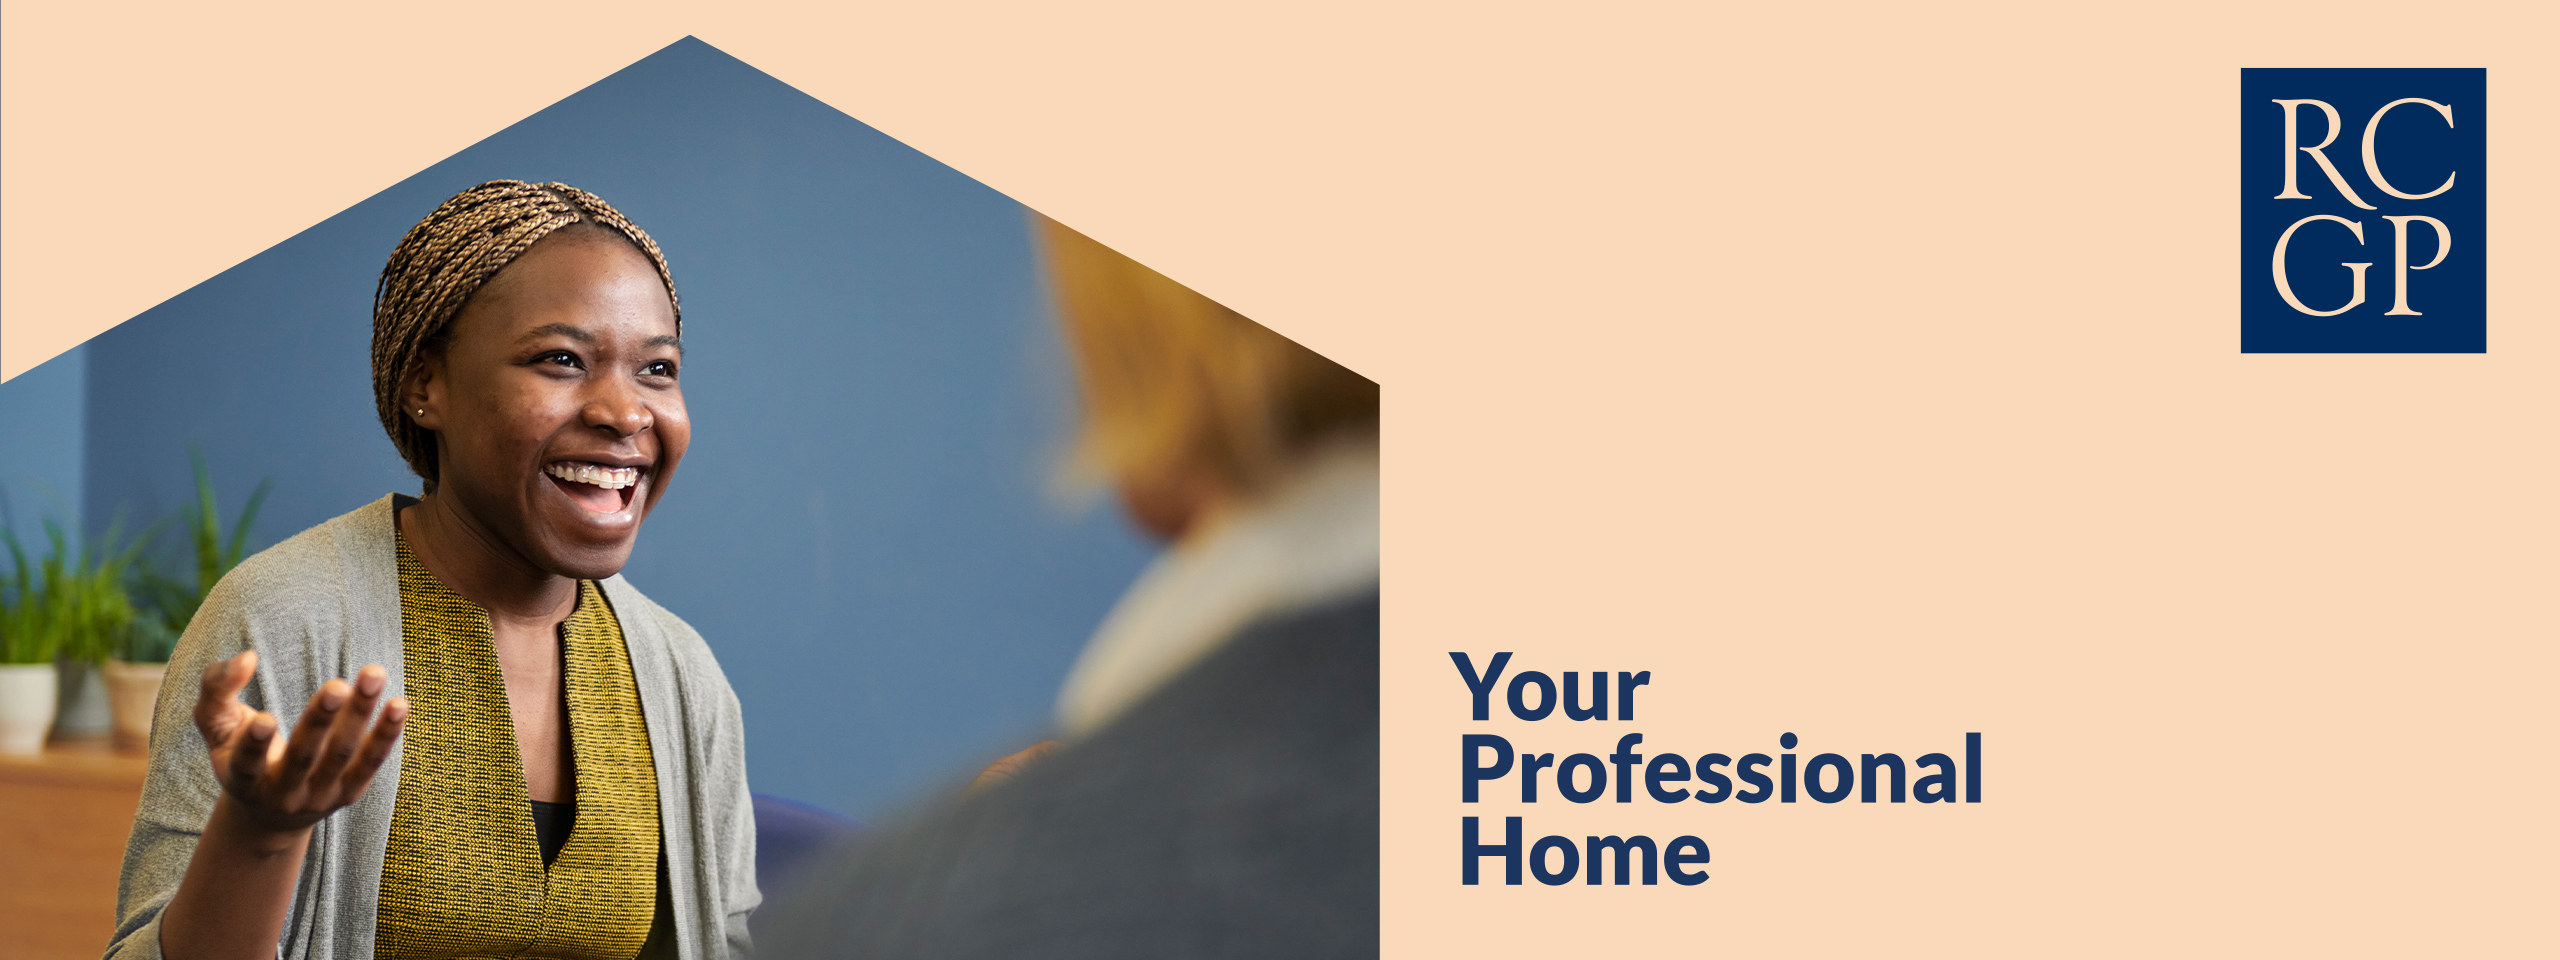 RCGP Your professional home